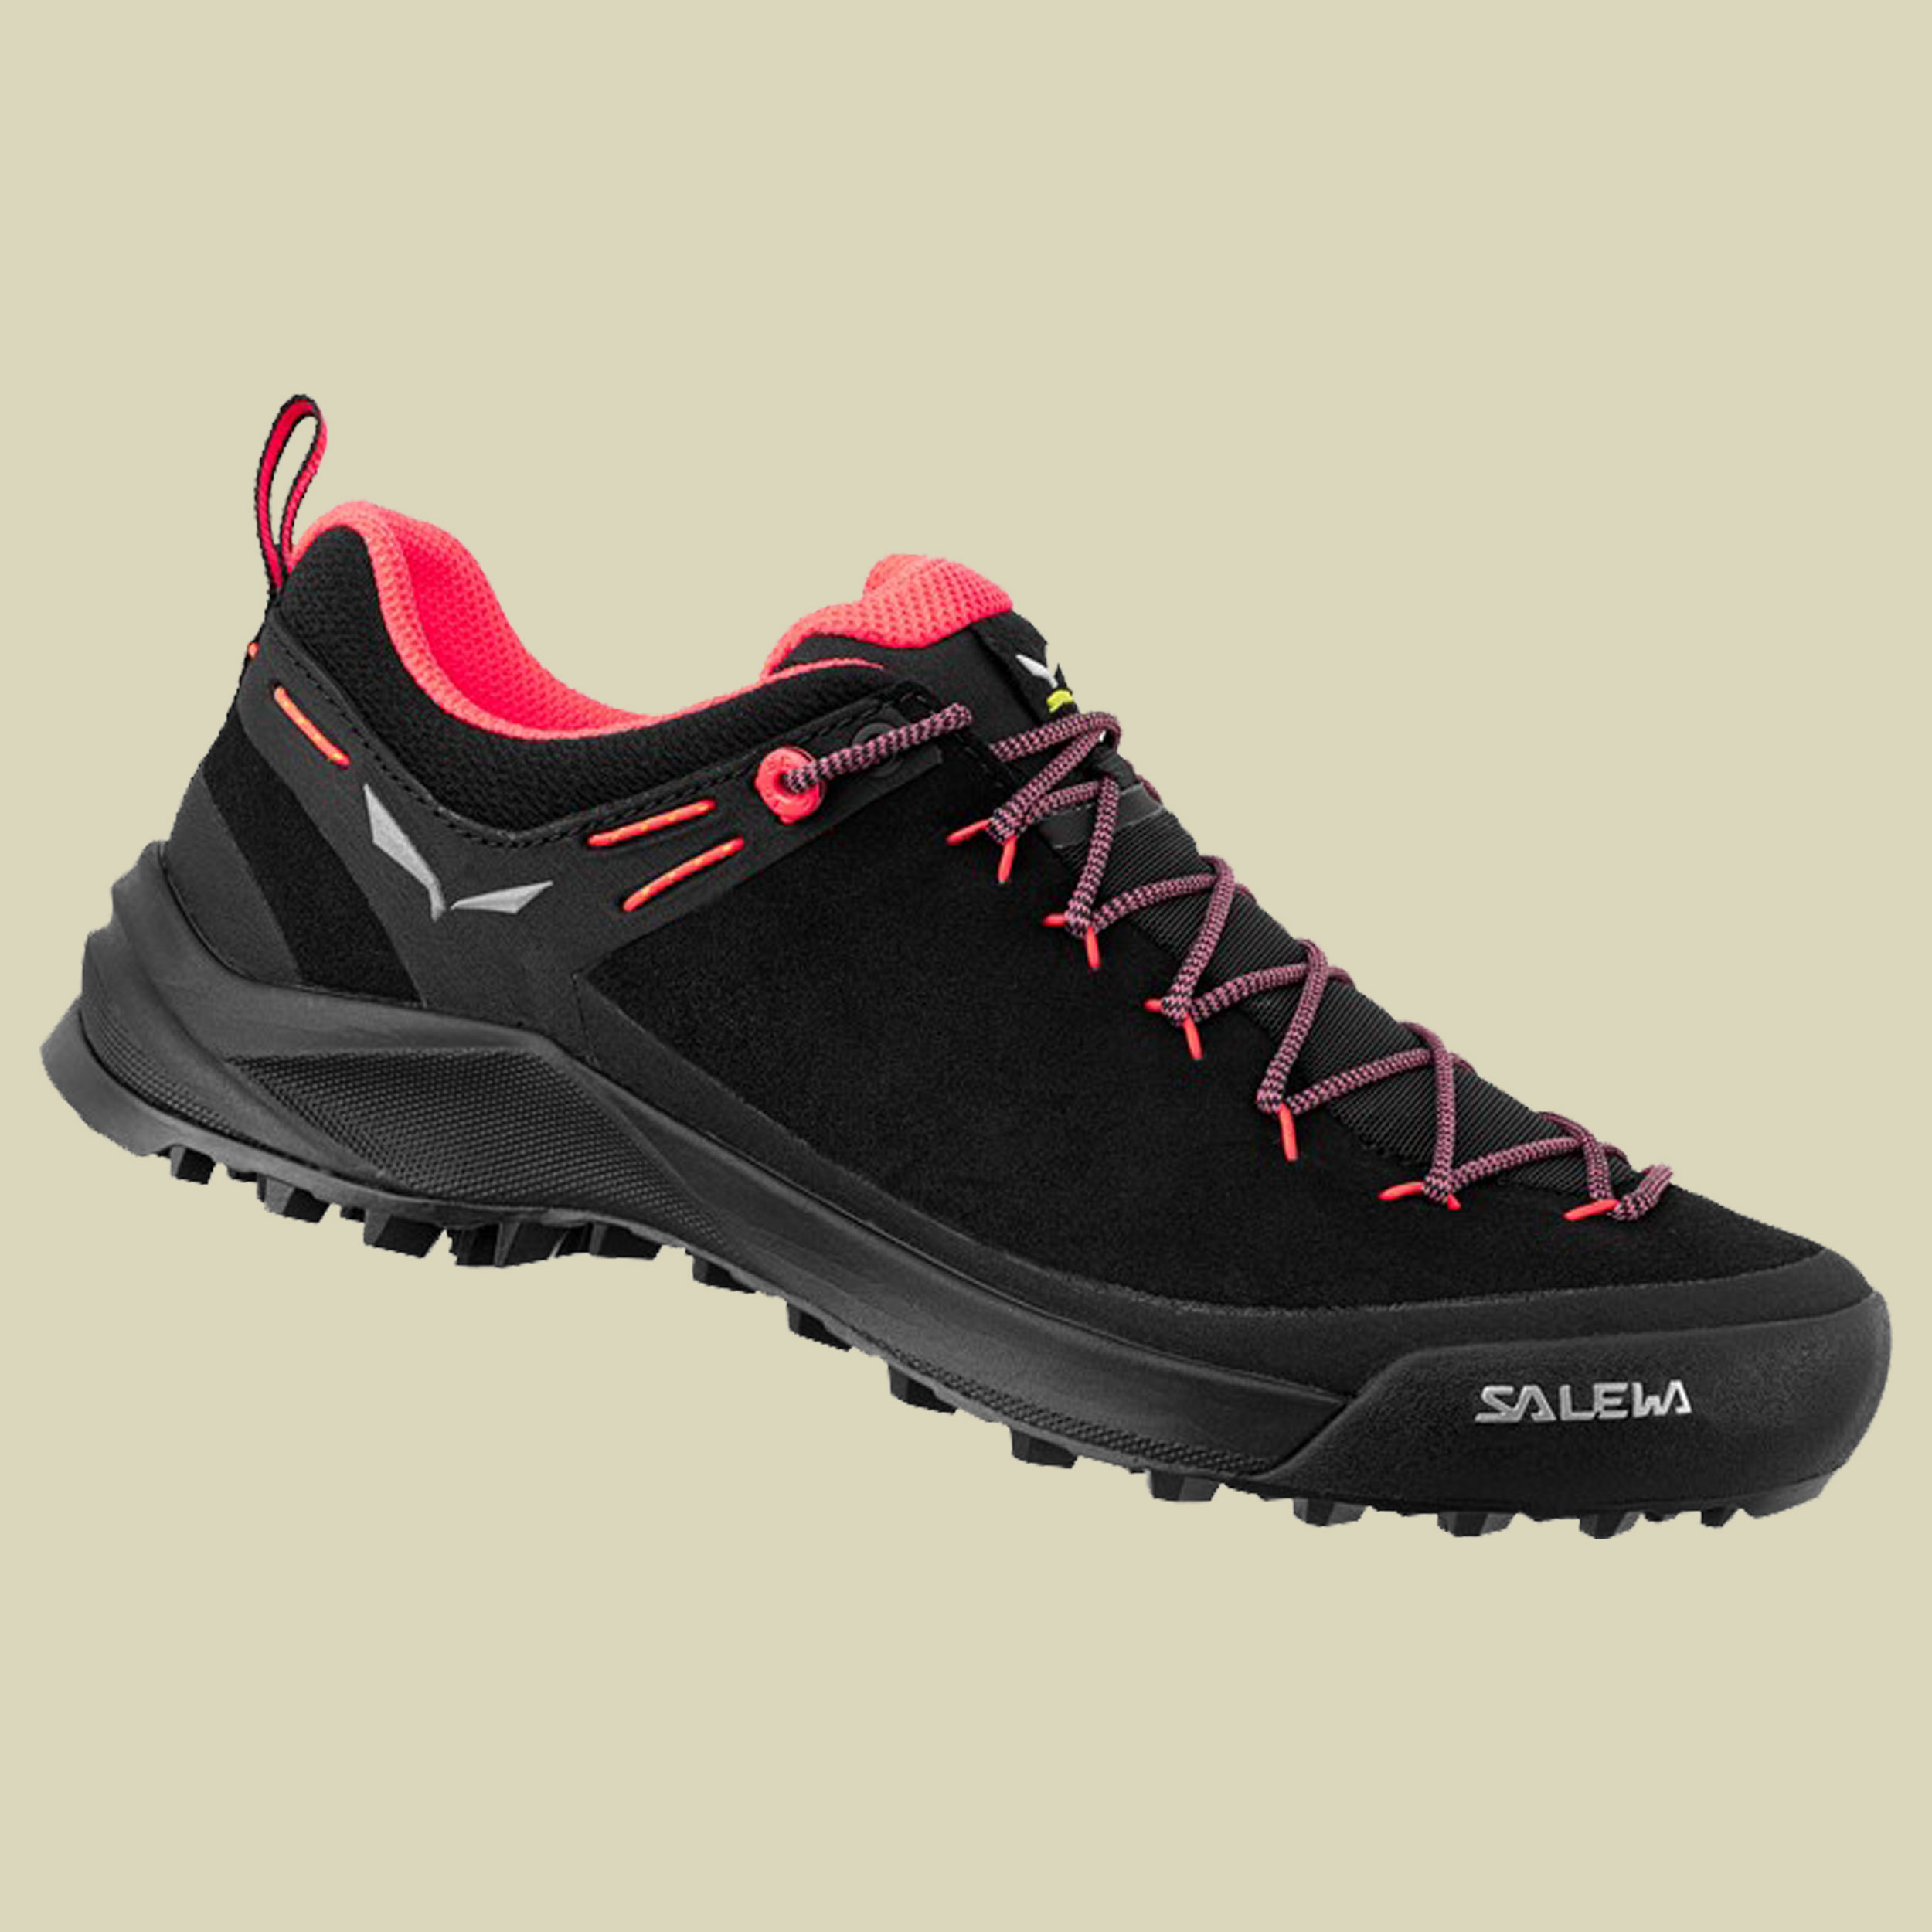 WS Wildfire Leather Größe UK 6 Farbe black/fluo coral